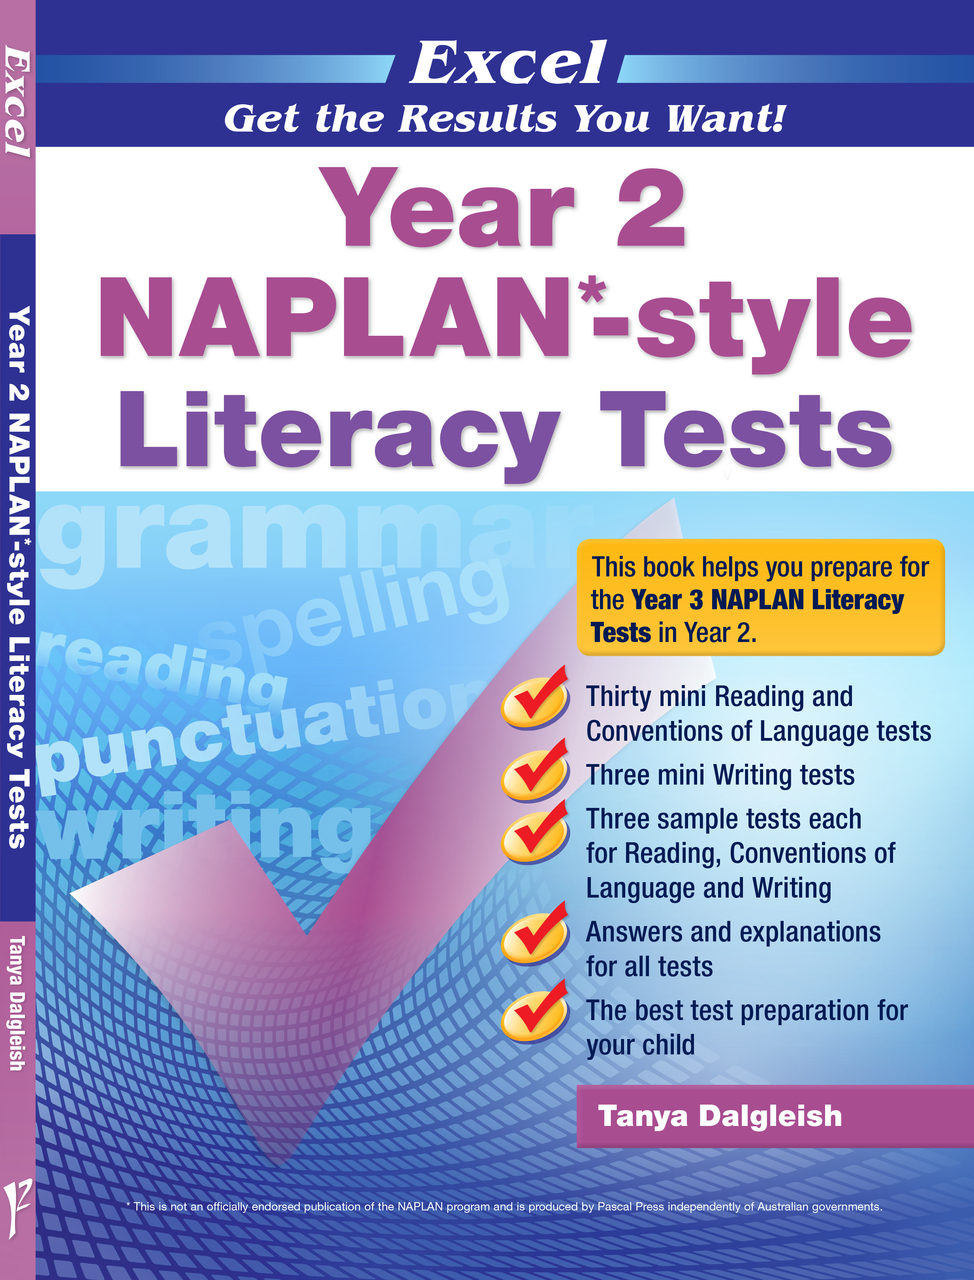 EXCEL - YEAR 2 NAPLAN*-STYLE LITERACY TESTS